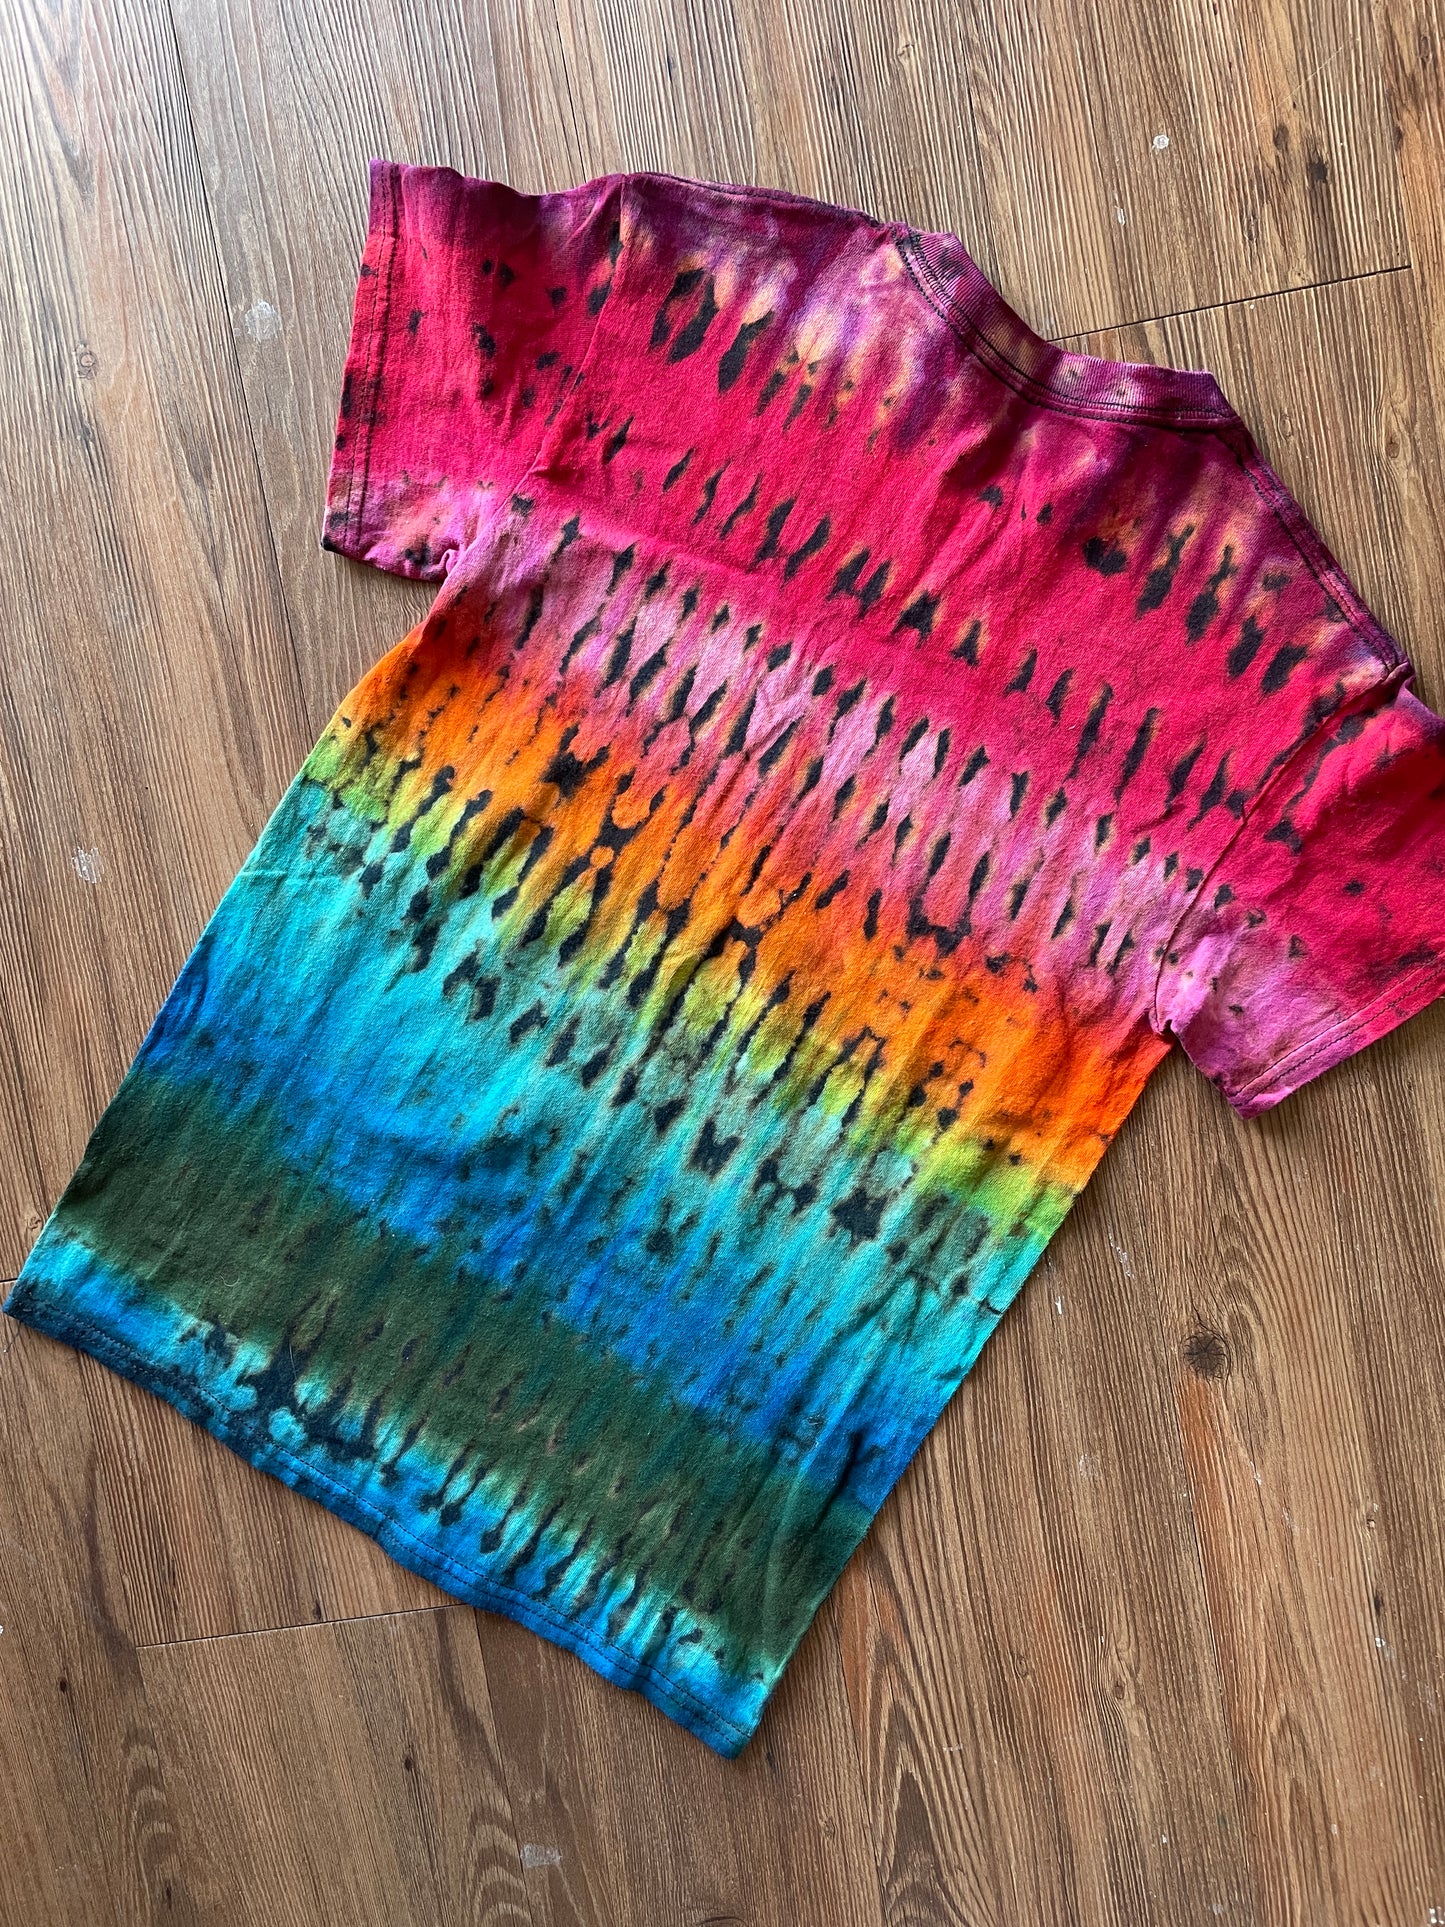 SMALL Men’s Be Kind To One Another Rainbow T-Shirt | Black and Rainbow Handmade Reverse Tie Dye Short Sleeve